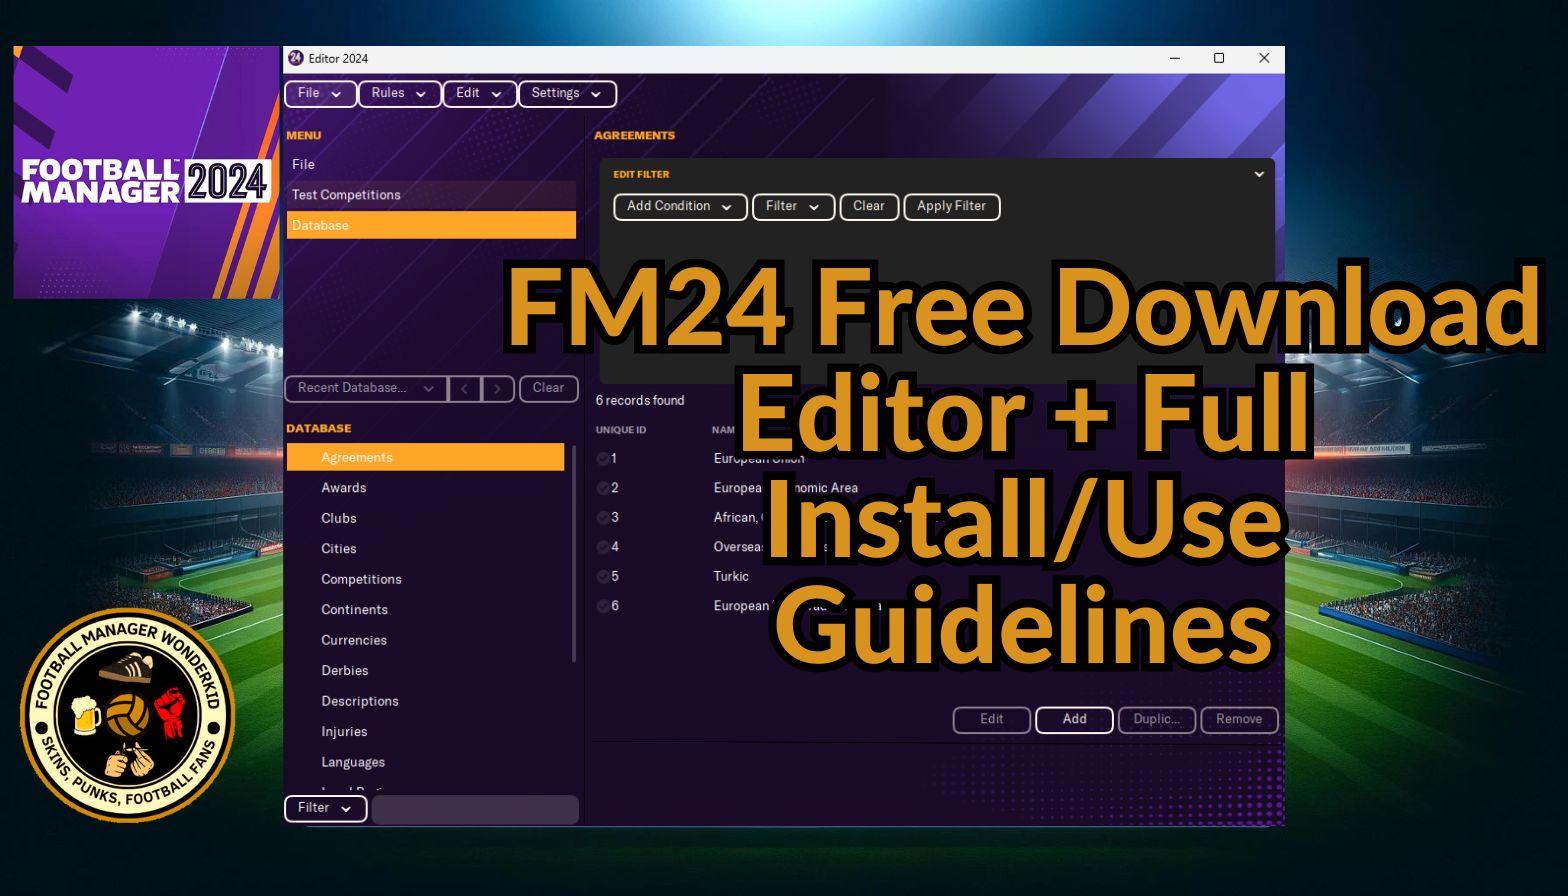 FM24 Editor Download + Full Install & Use Guidelines